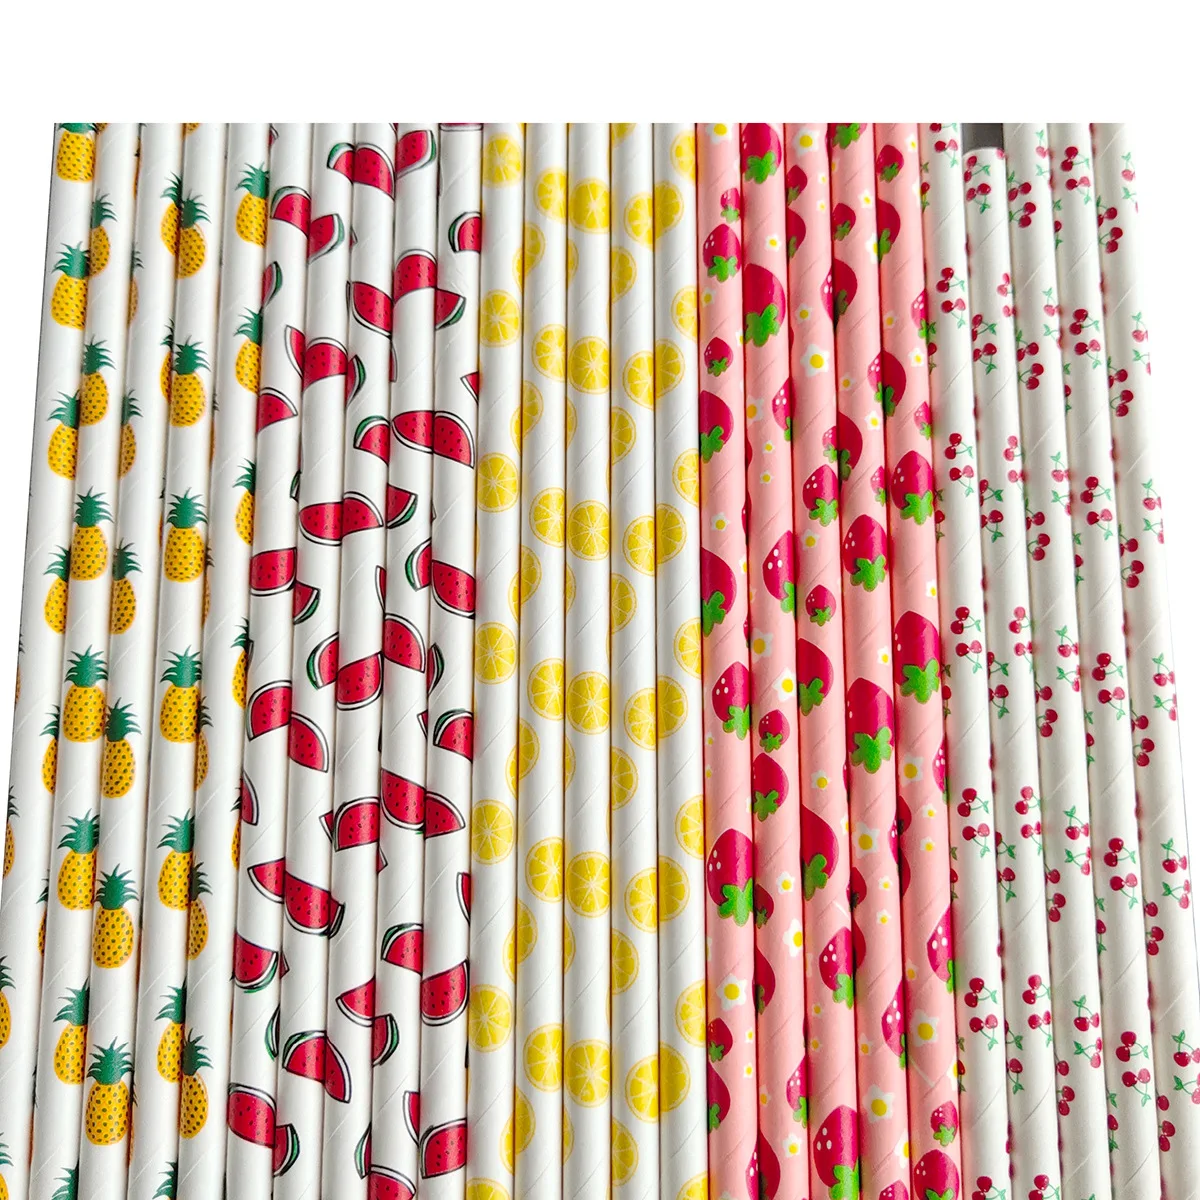 

25Pcs Colored Disposable Degradable Paper Straws Fruit Pattern Pineapple Printed Straws Summer Hawaii Birthday Party Drink Decor